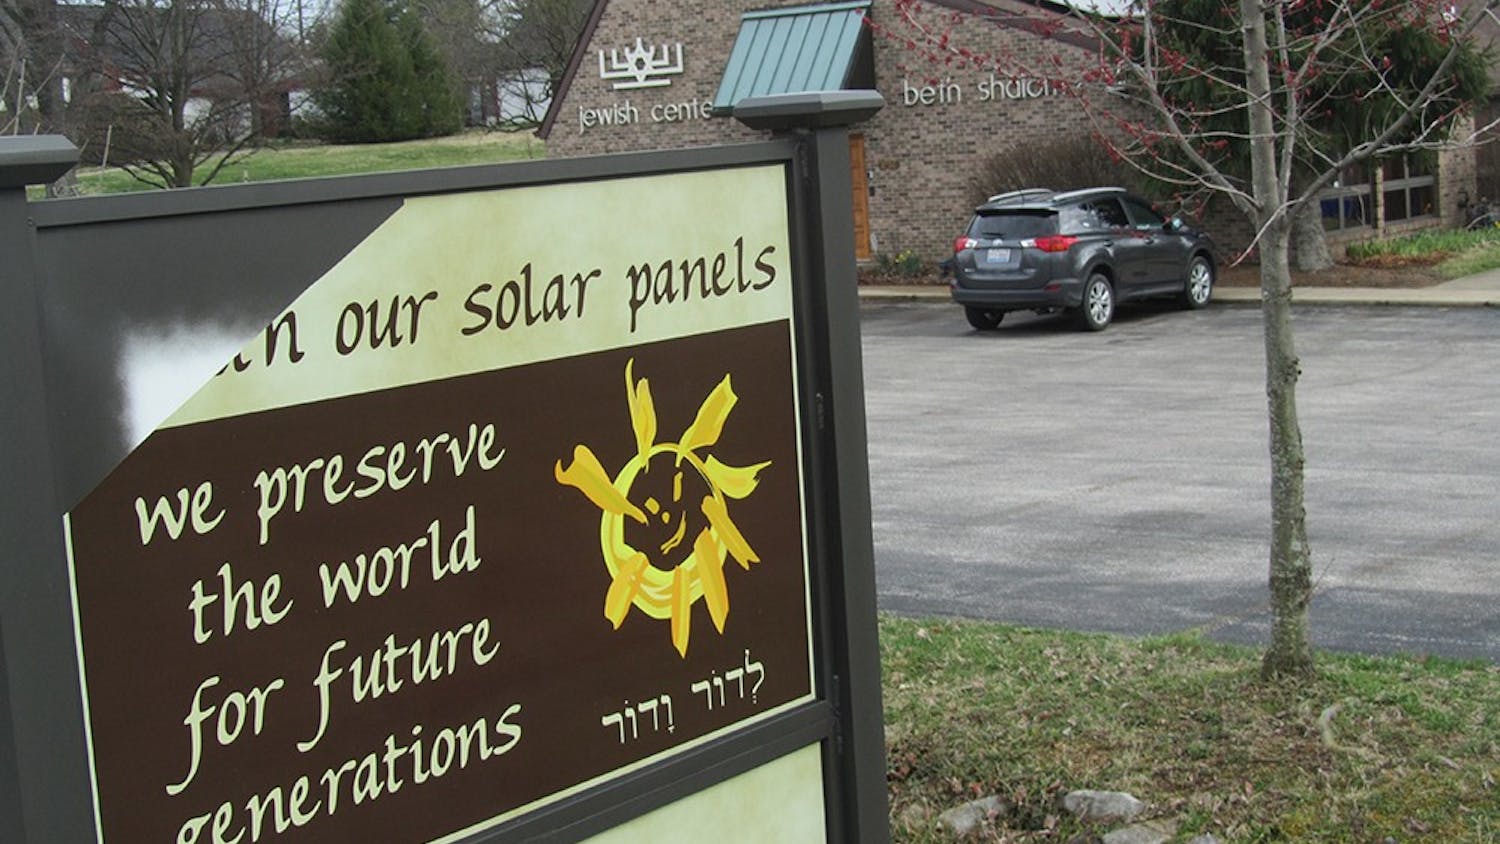 Congregation Beth Shalom was one of the Bloomington faith communities to receive money for solar panels in 2013.